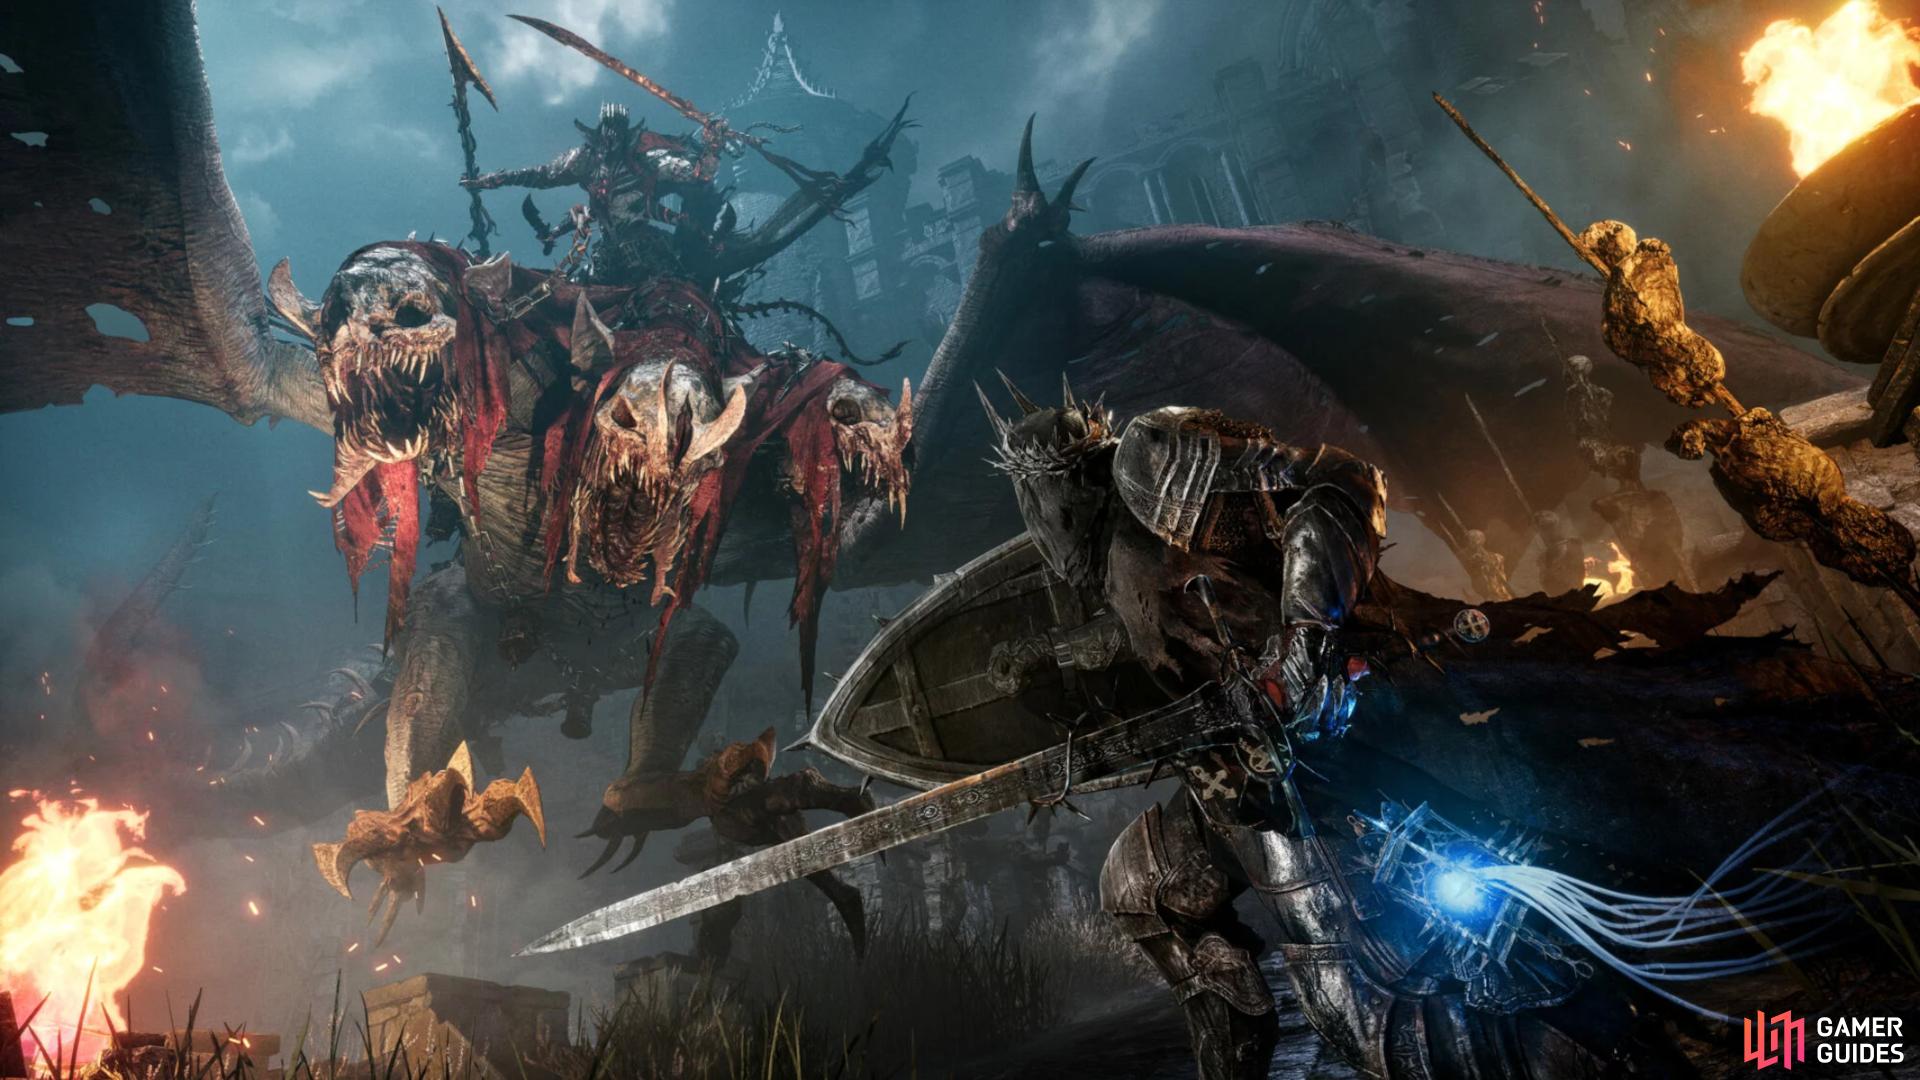 Lords of the Fallen (2023) Guide - How To Unlock Every Secret Class